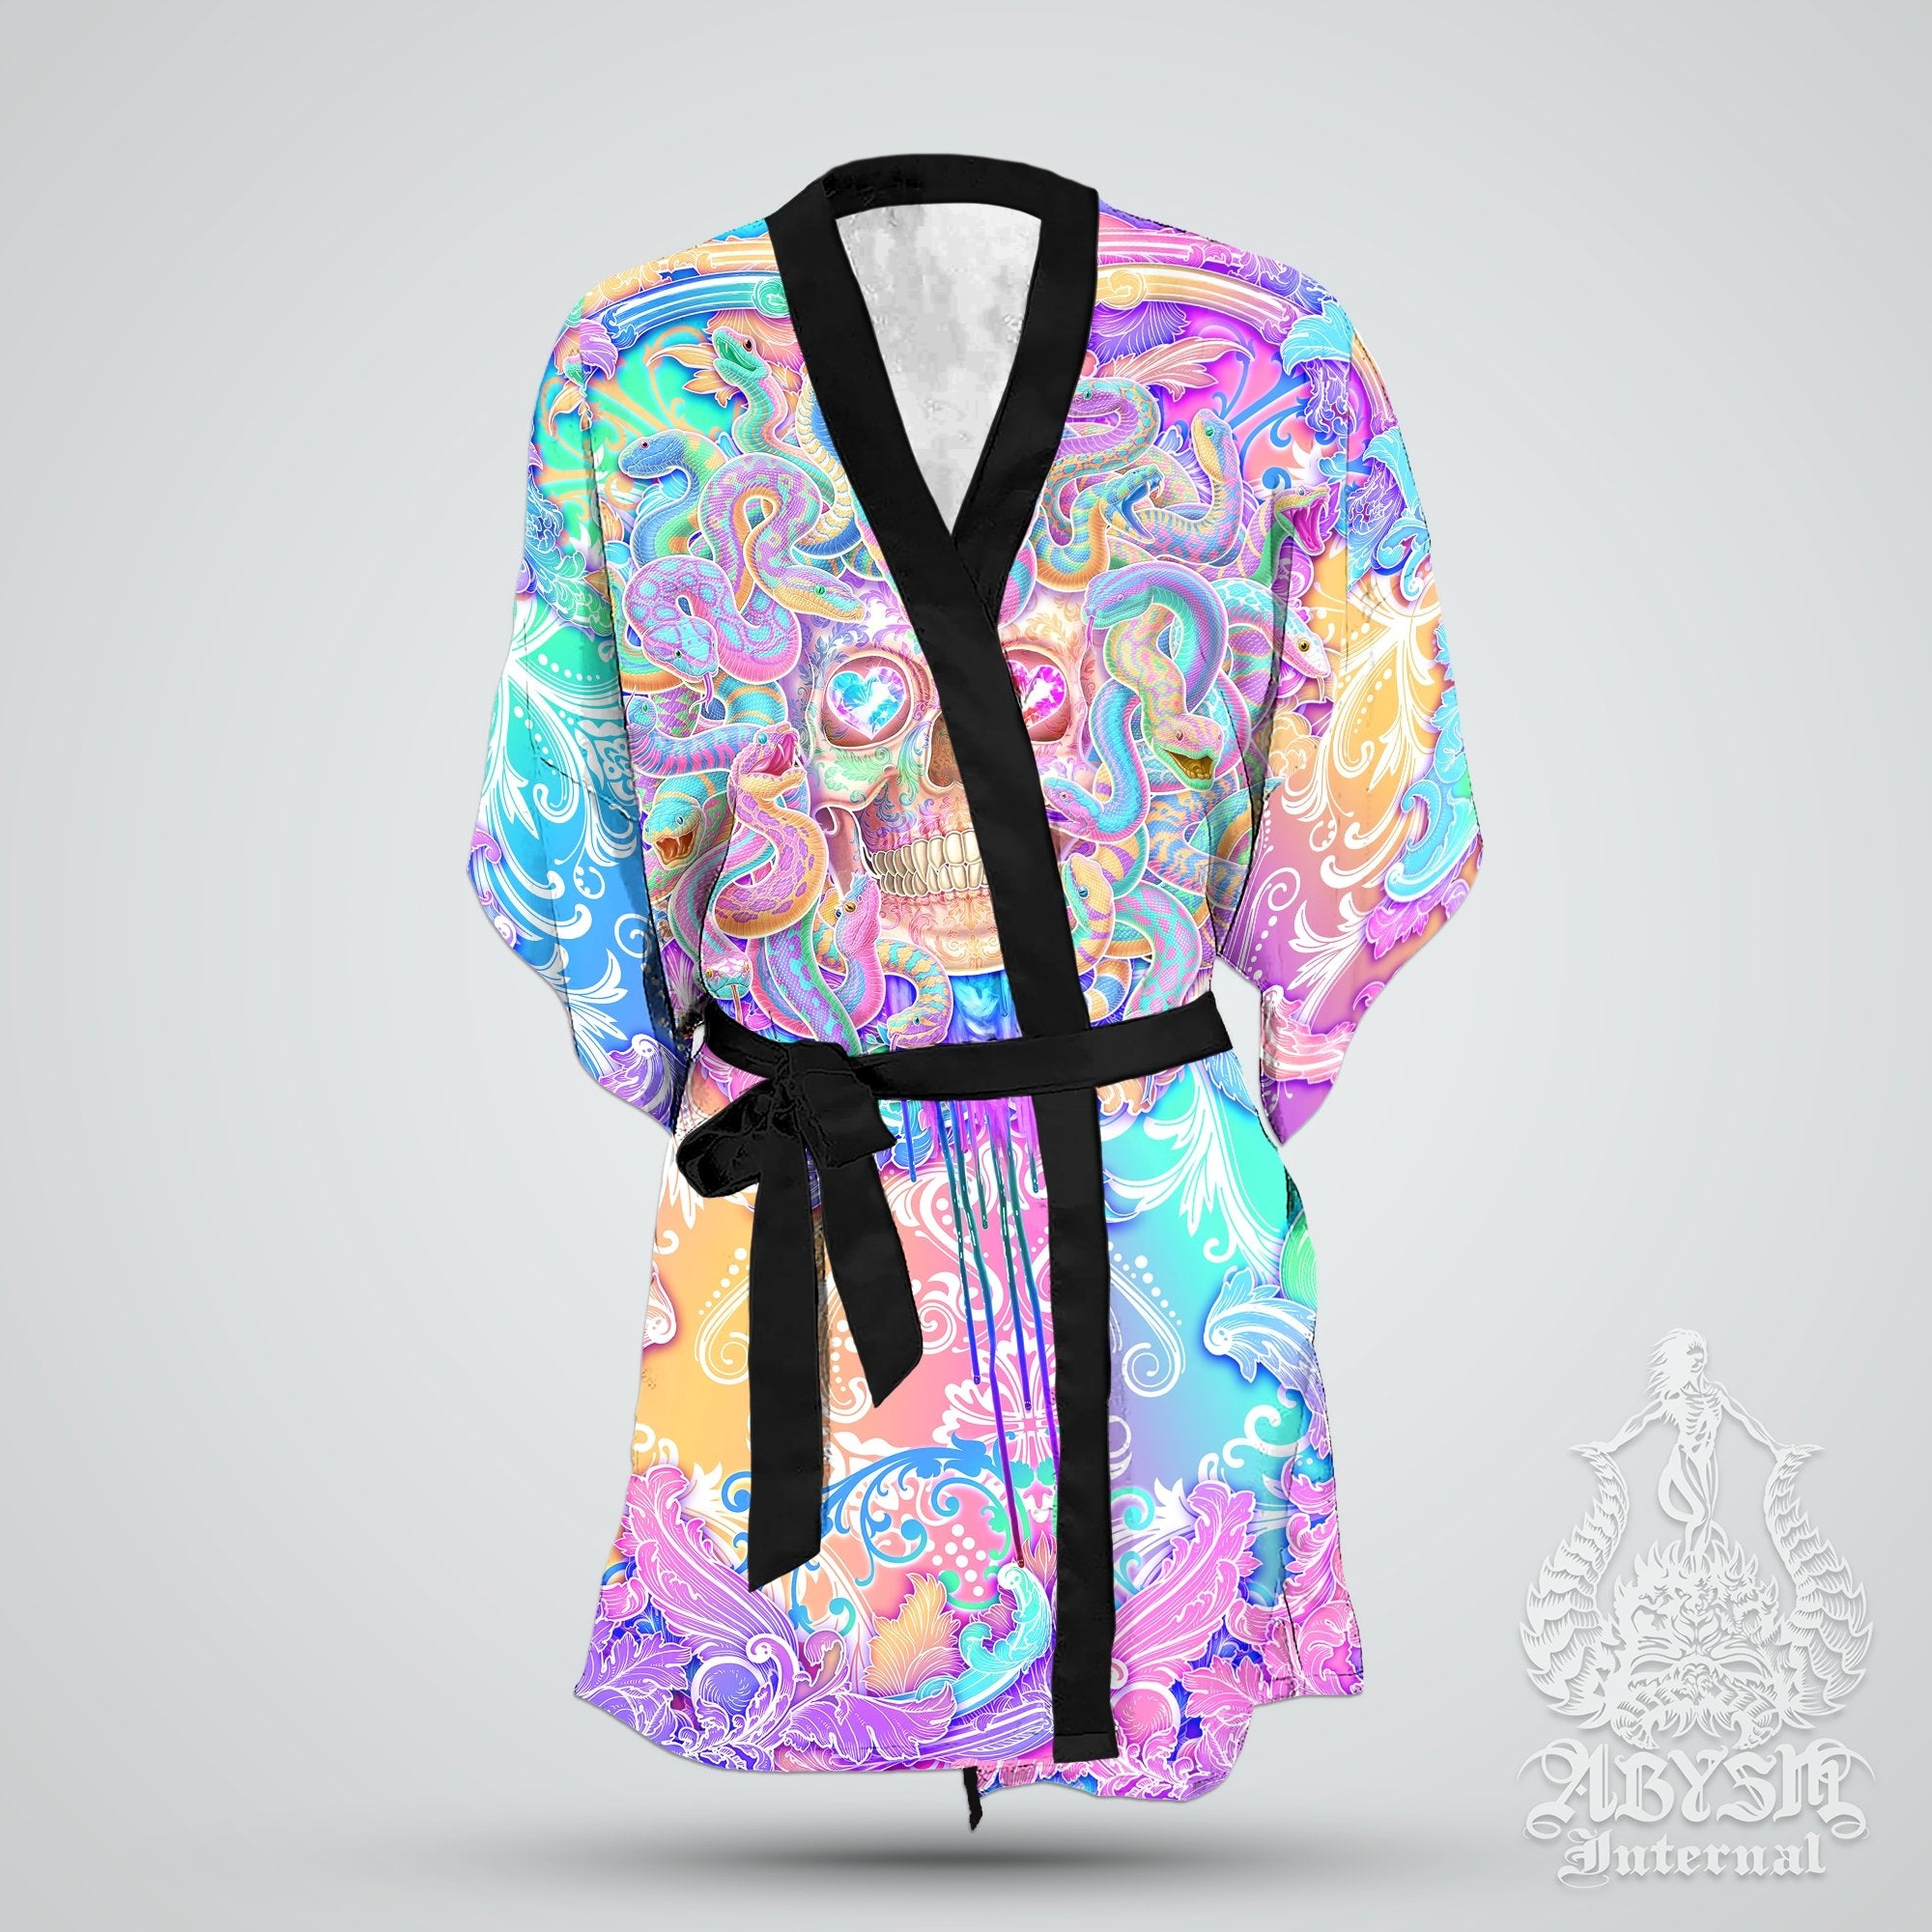 Medusa Skull Cover Up, Beach Rave Outfit, Party Kimono, Summer Festival Robe, Aesthetic Indie and Alternative Clothing, Unisex - Holographic Pastel - Abysm Internal